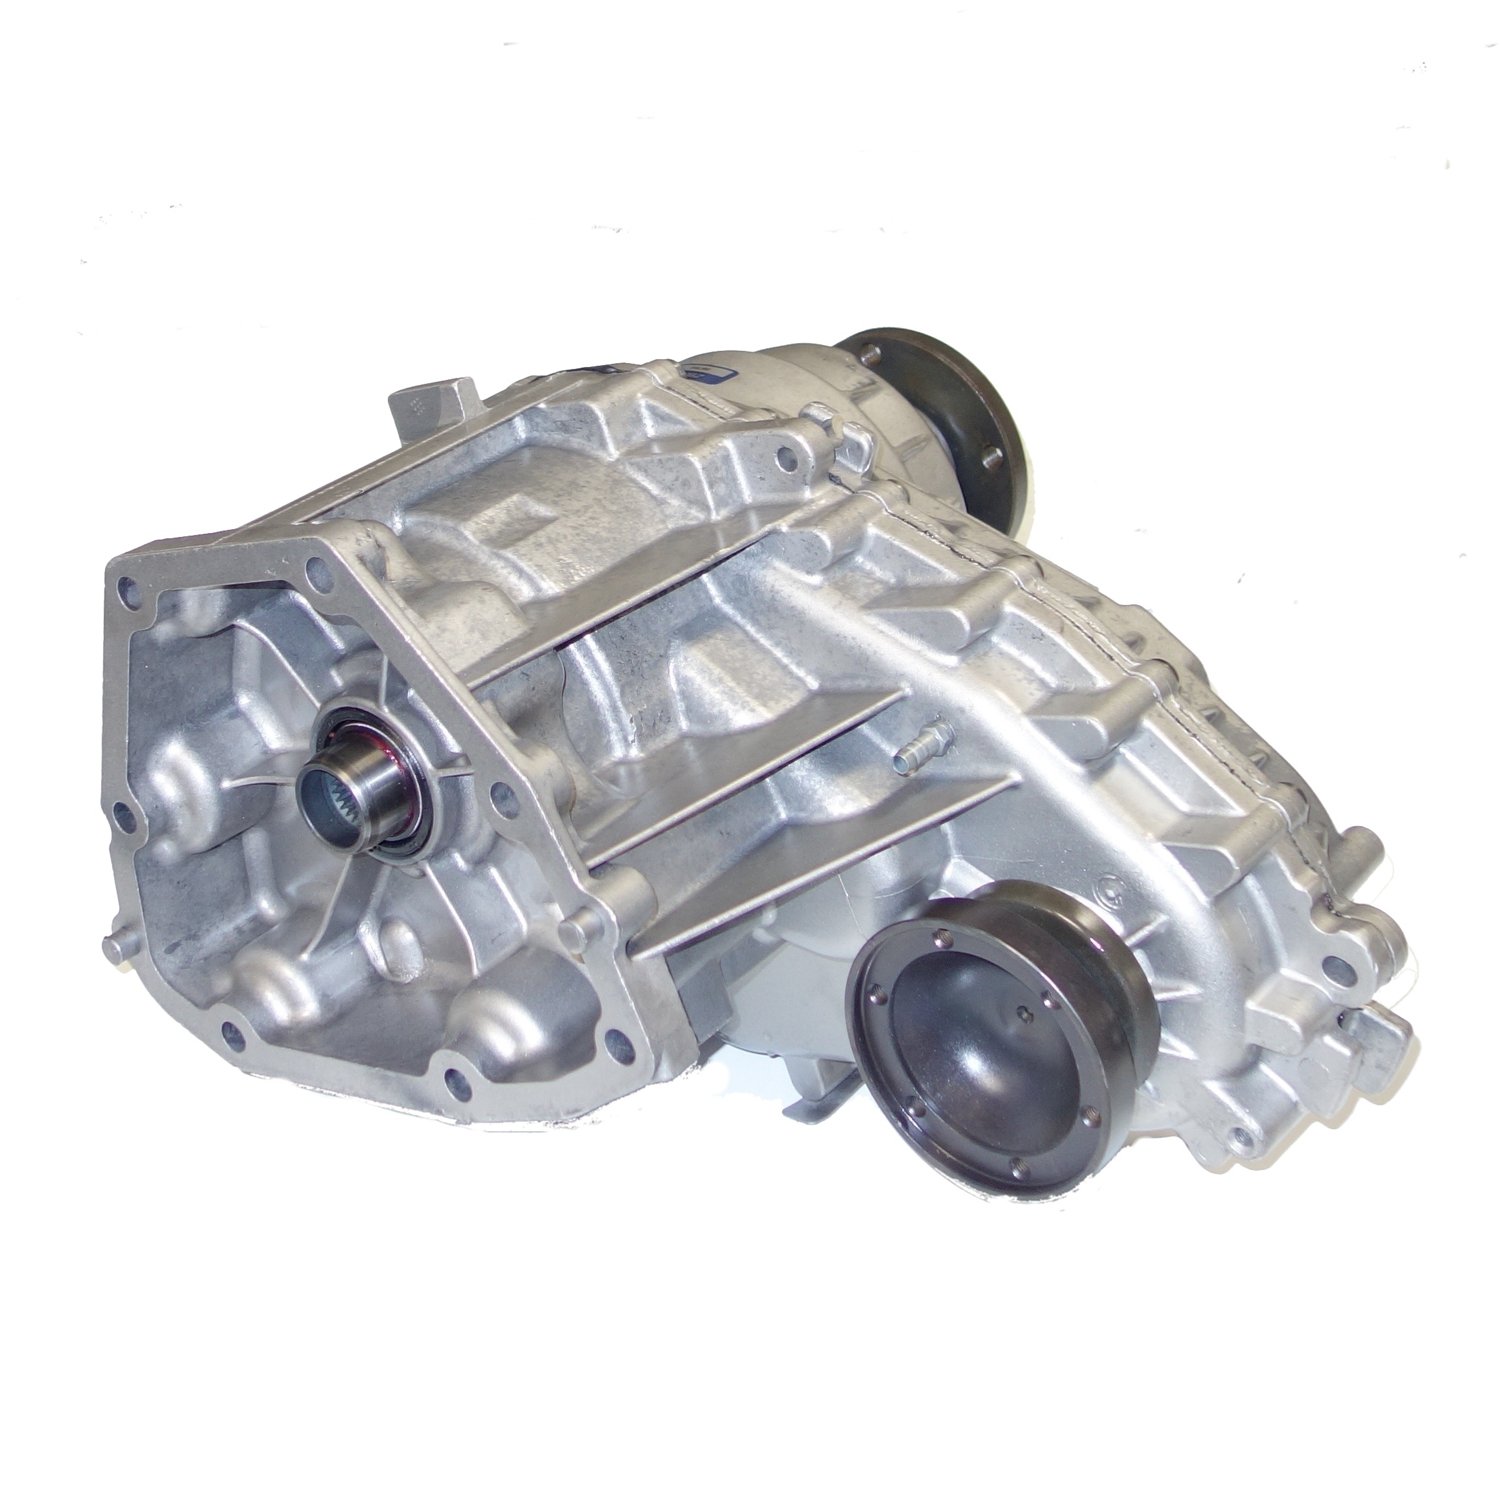 Remanufactured Transfer Case for 2006-2010 Ford Explorer & Mercury Mountaineer